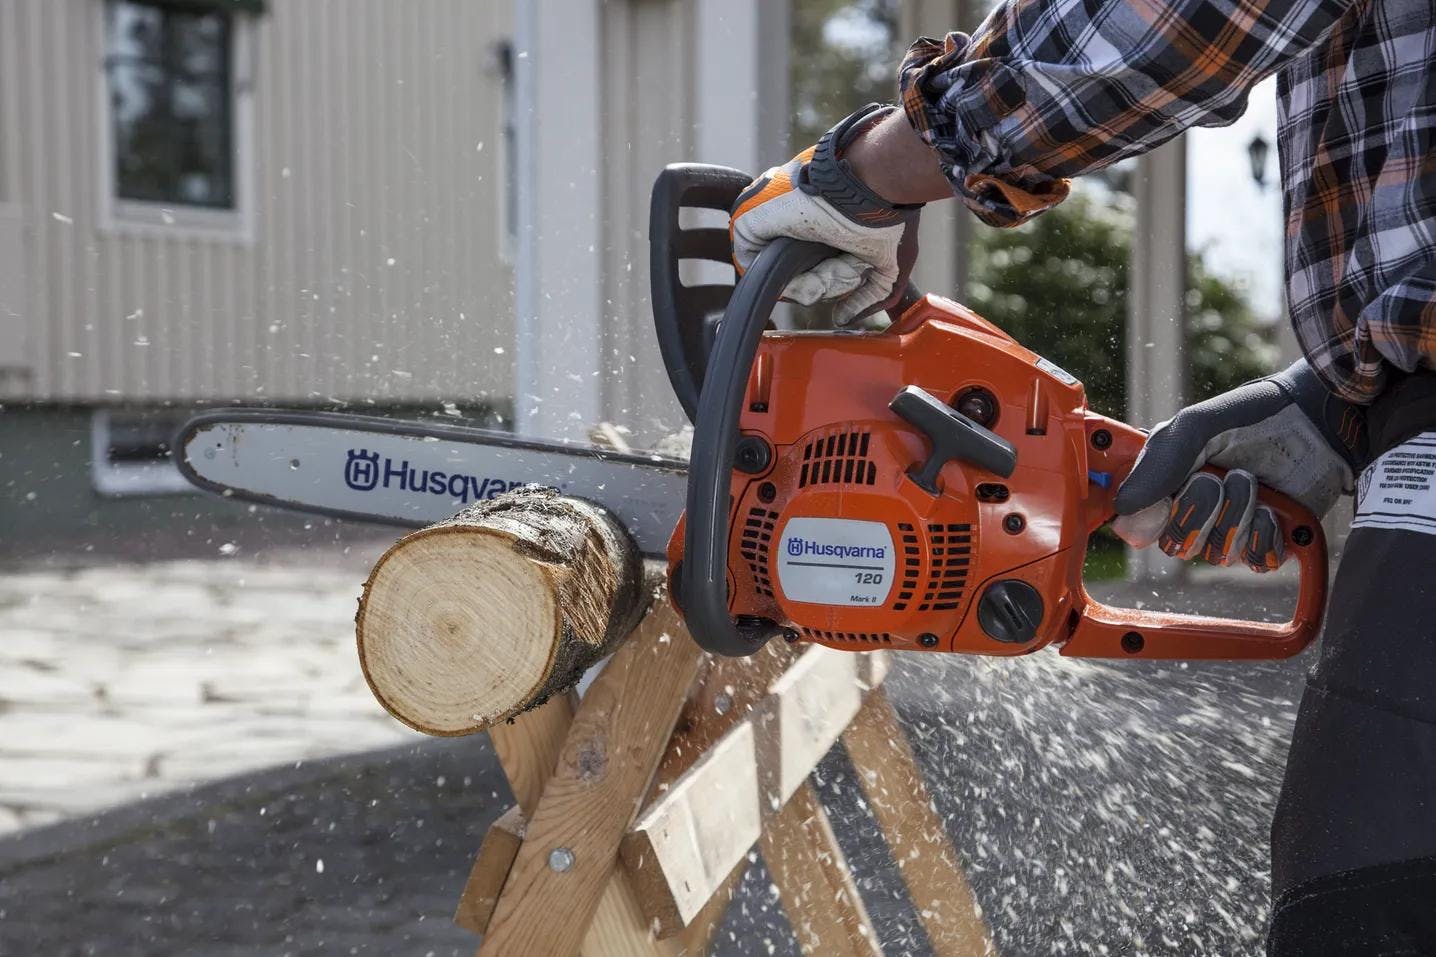 chainsaw offer